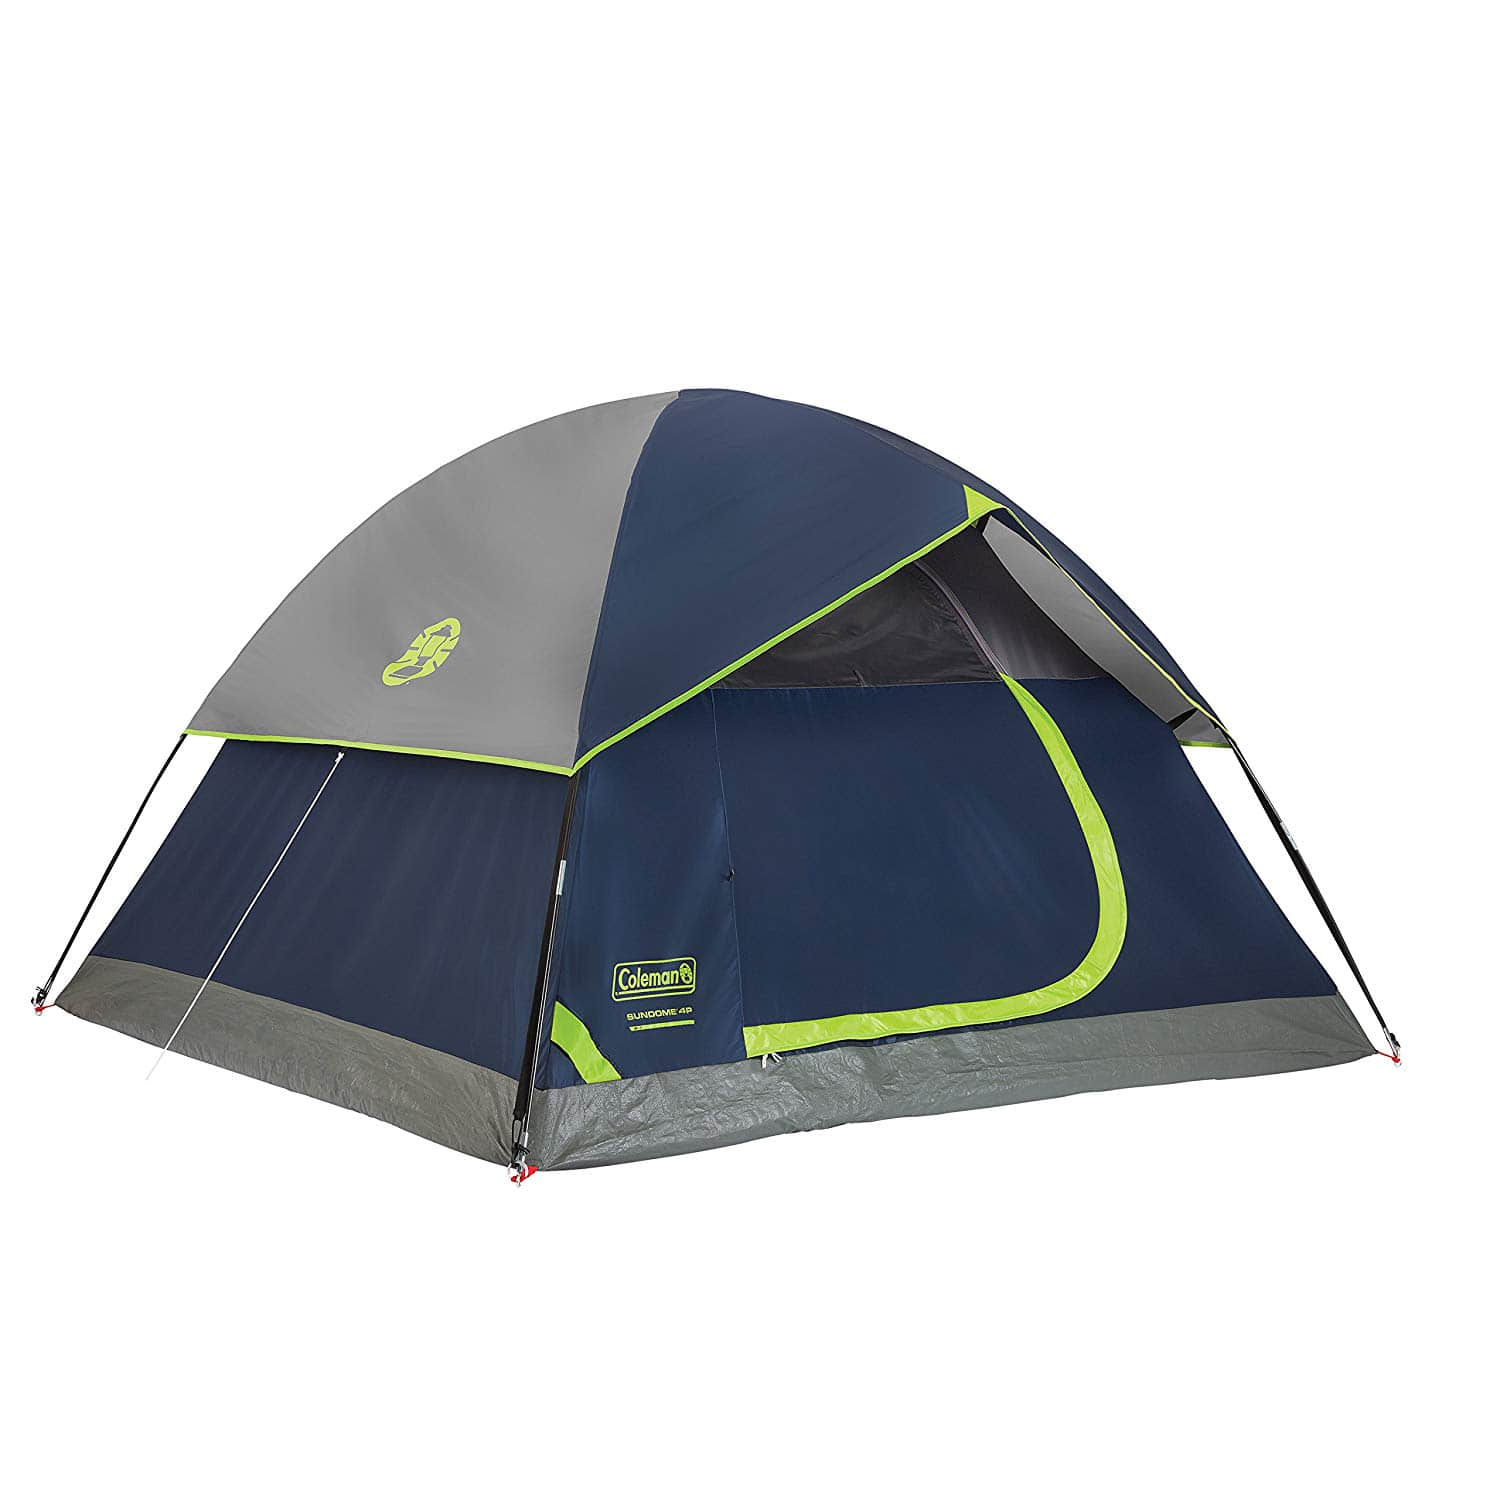 Sundome 4-Person Outdoor Tent by Coleman(Navy Color)